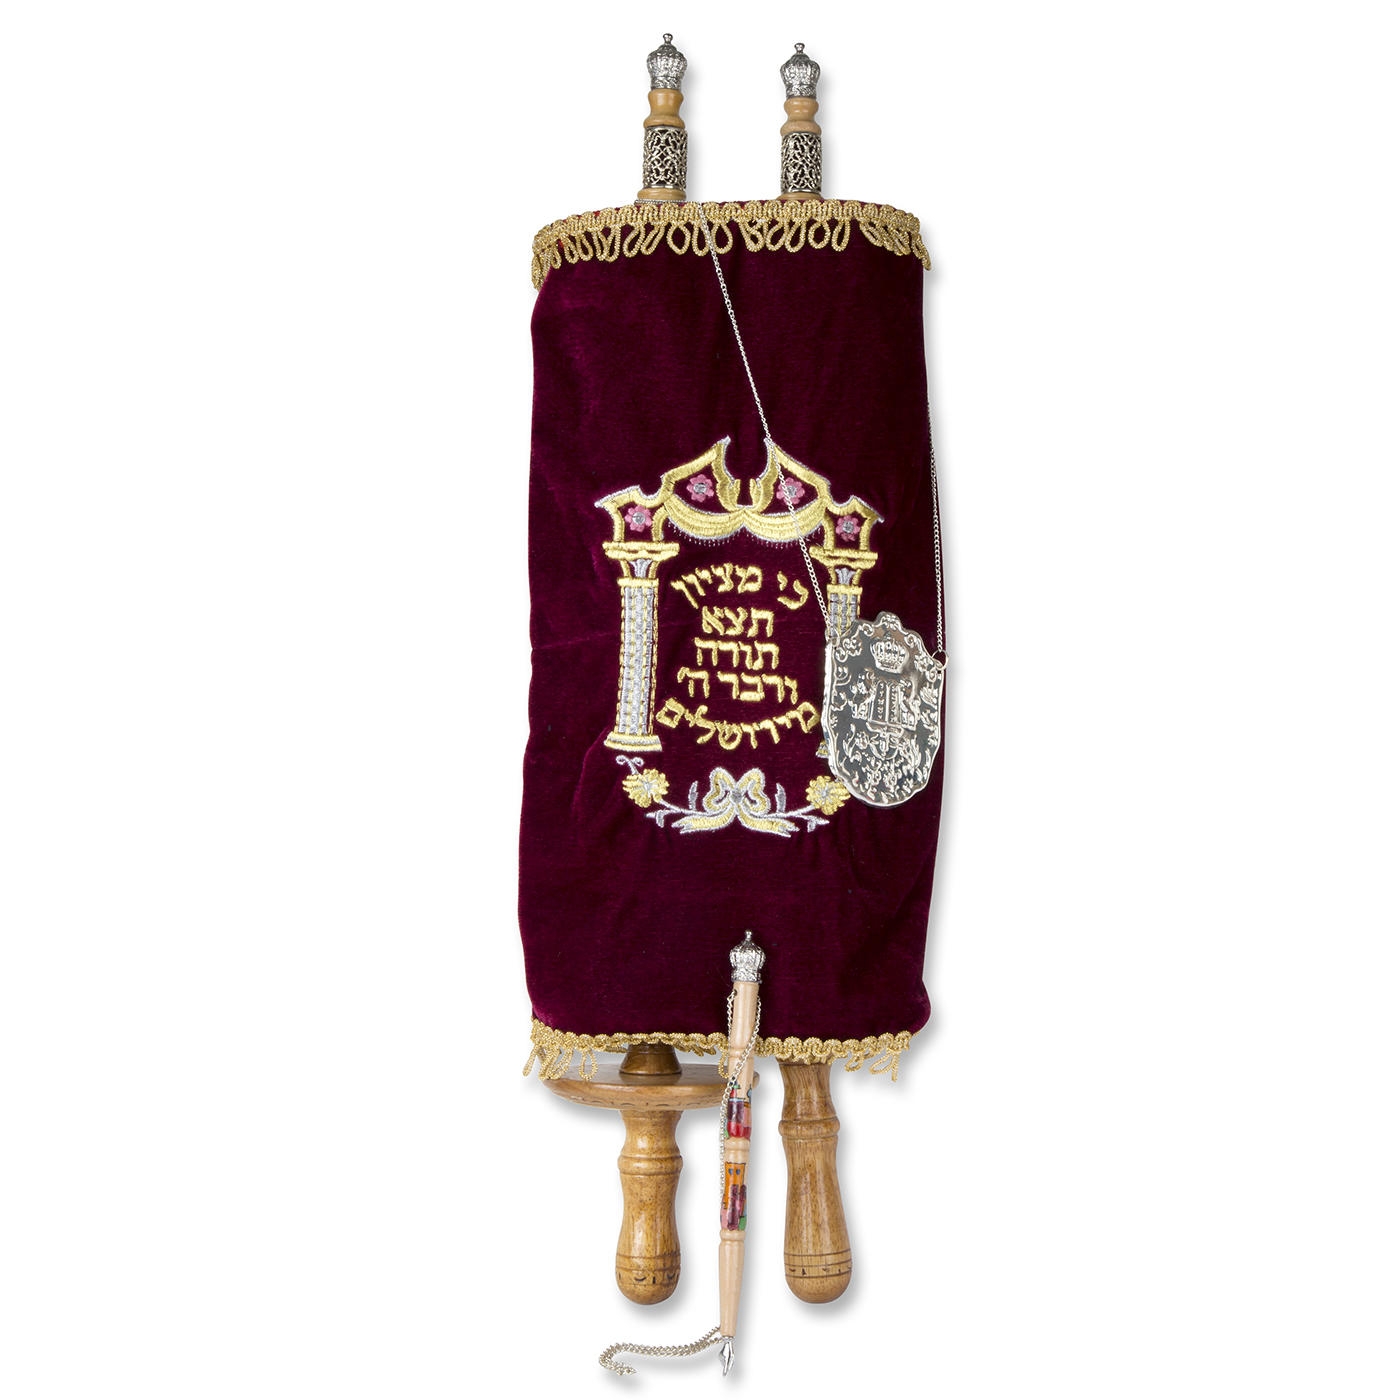 Deluxe Torah Scroll Replica - Extra Large - 1